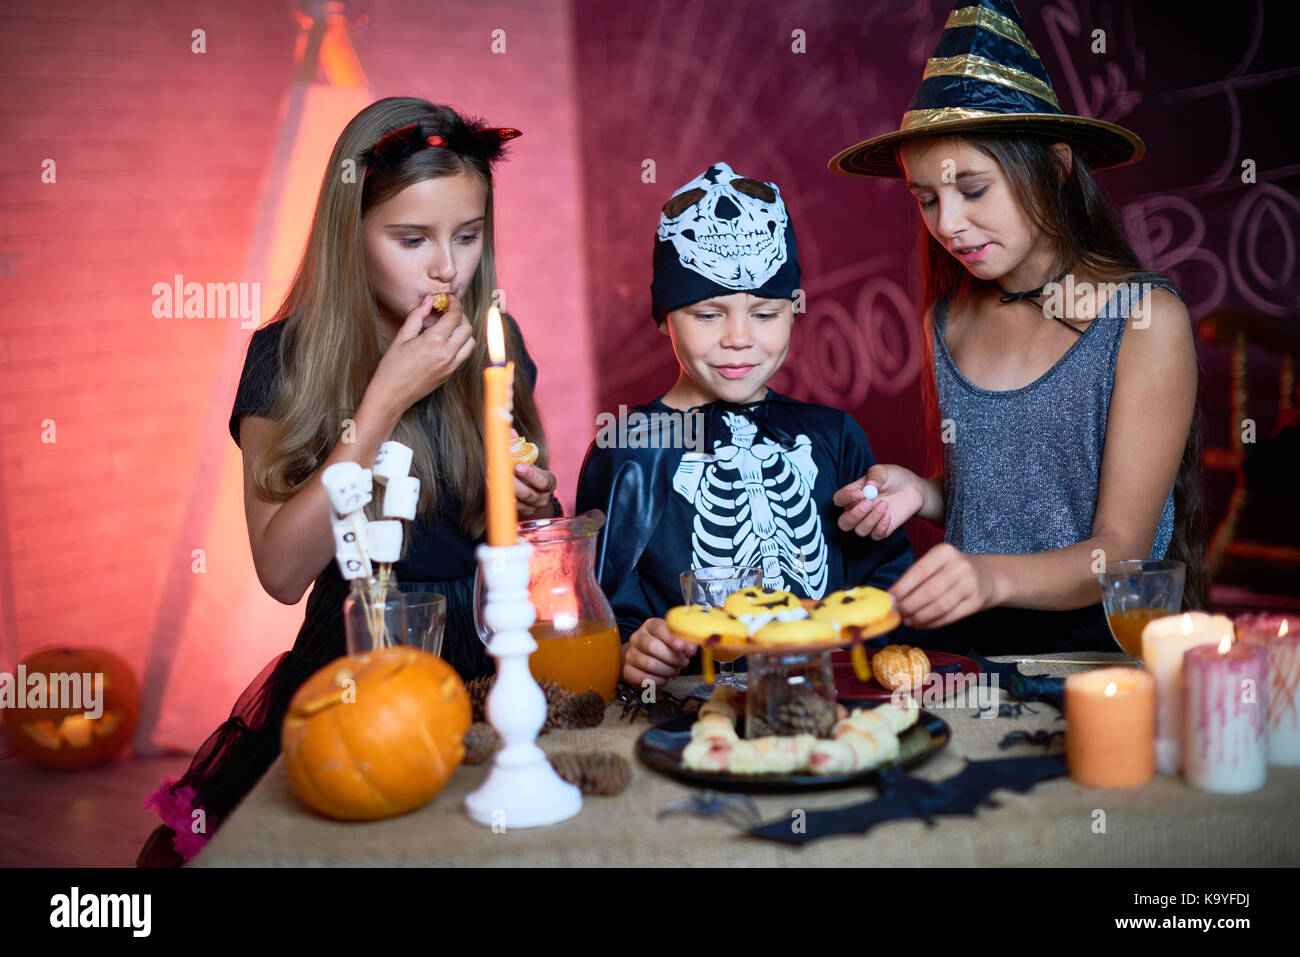 Positive curious kids eating sweet food from candy bar tasting Halloween treats in decorated studio at party Stock Photo